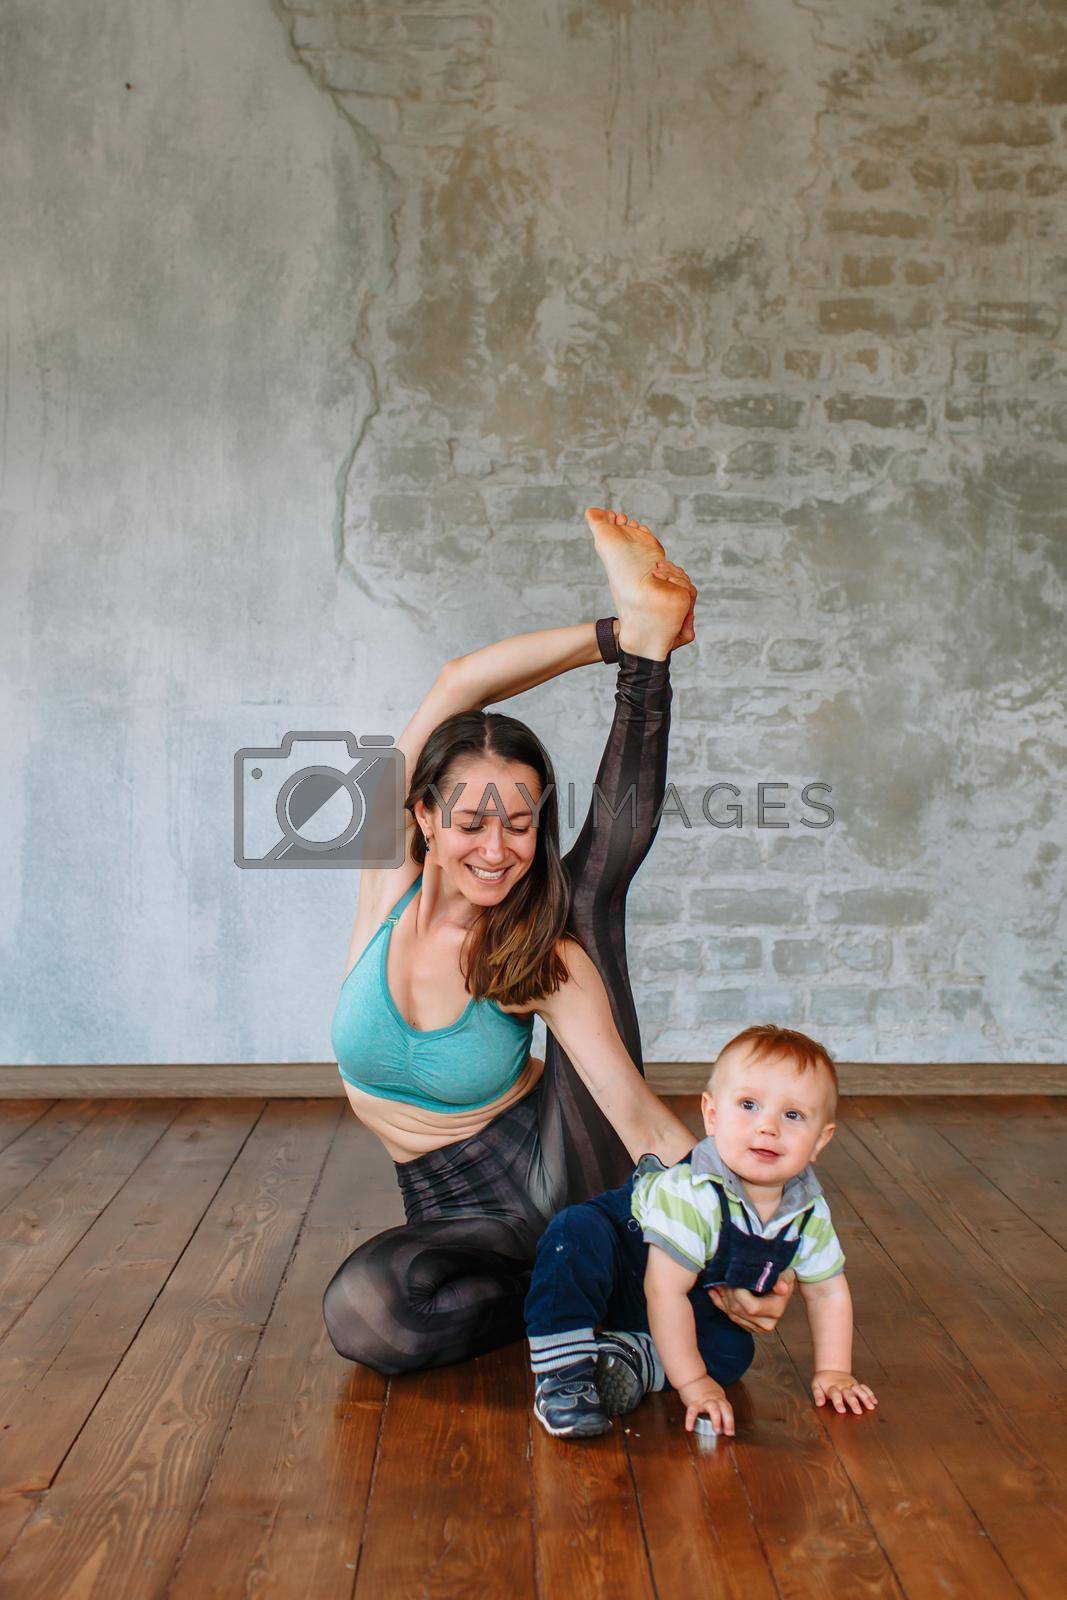 Yoga girl performs an exercise, next to her little son